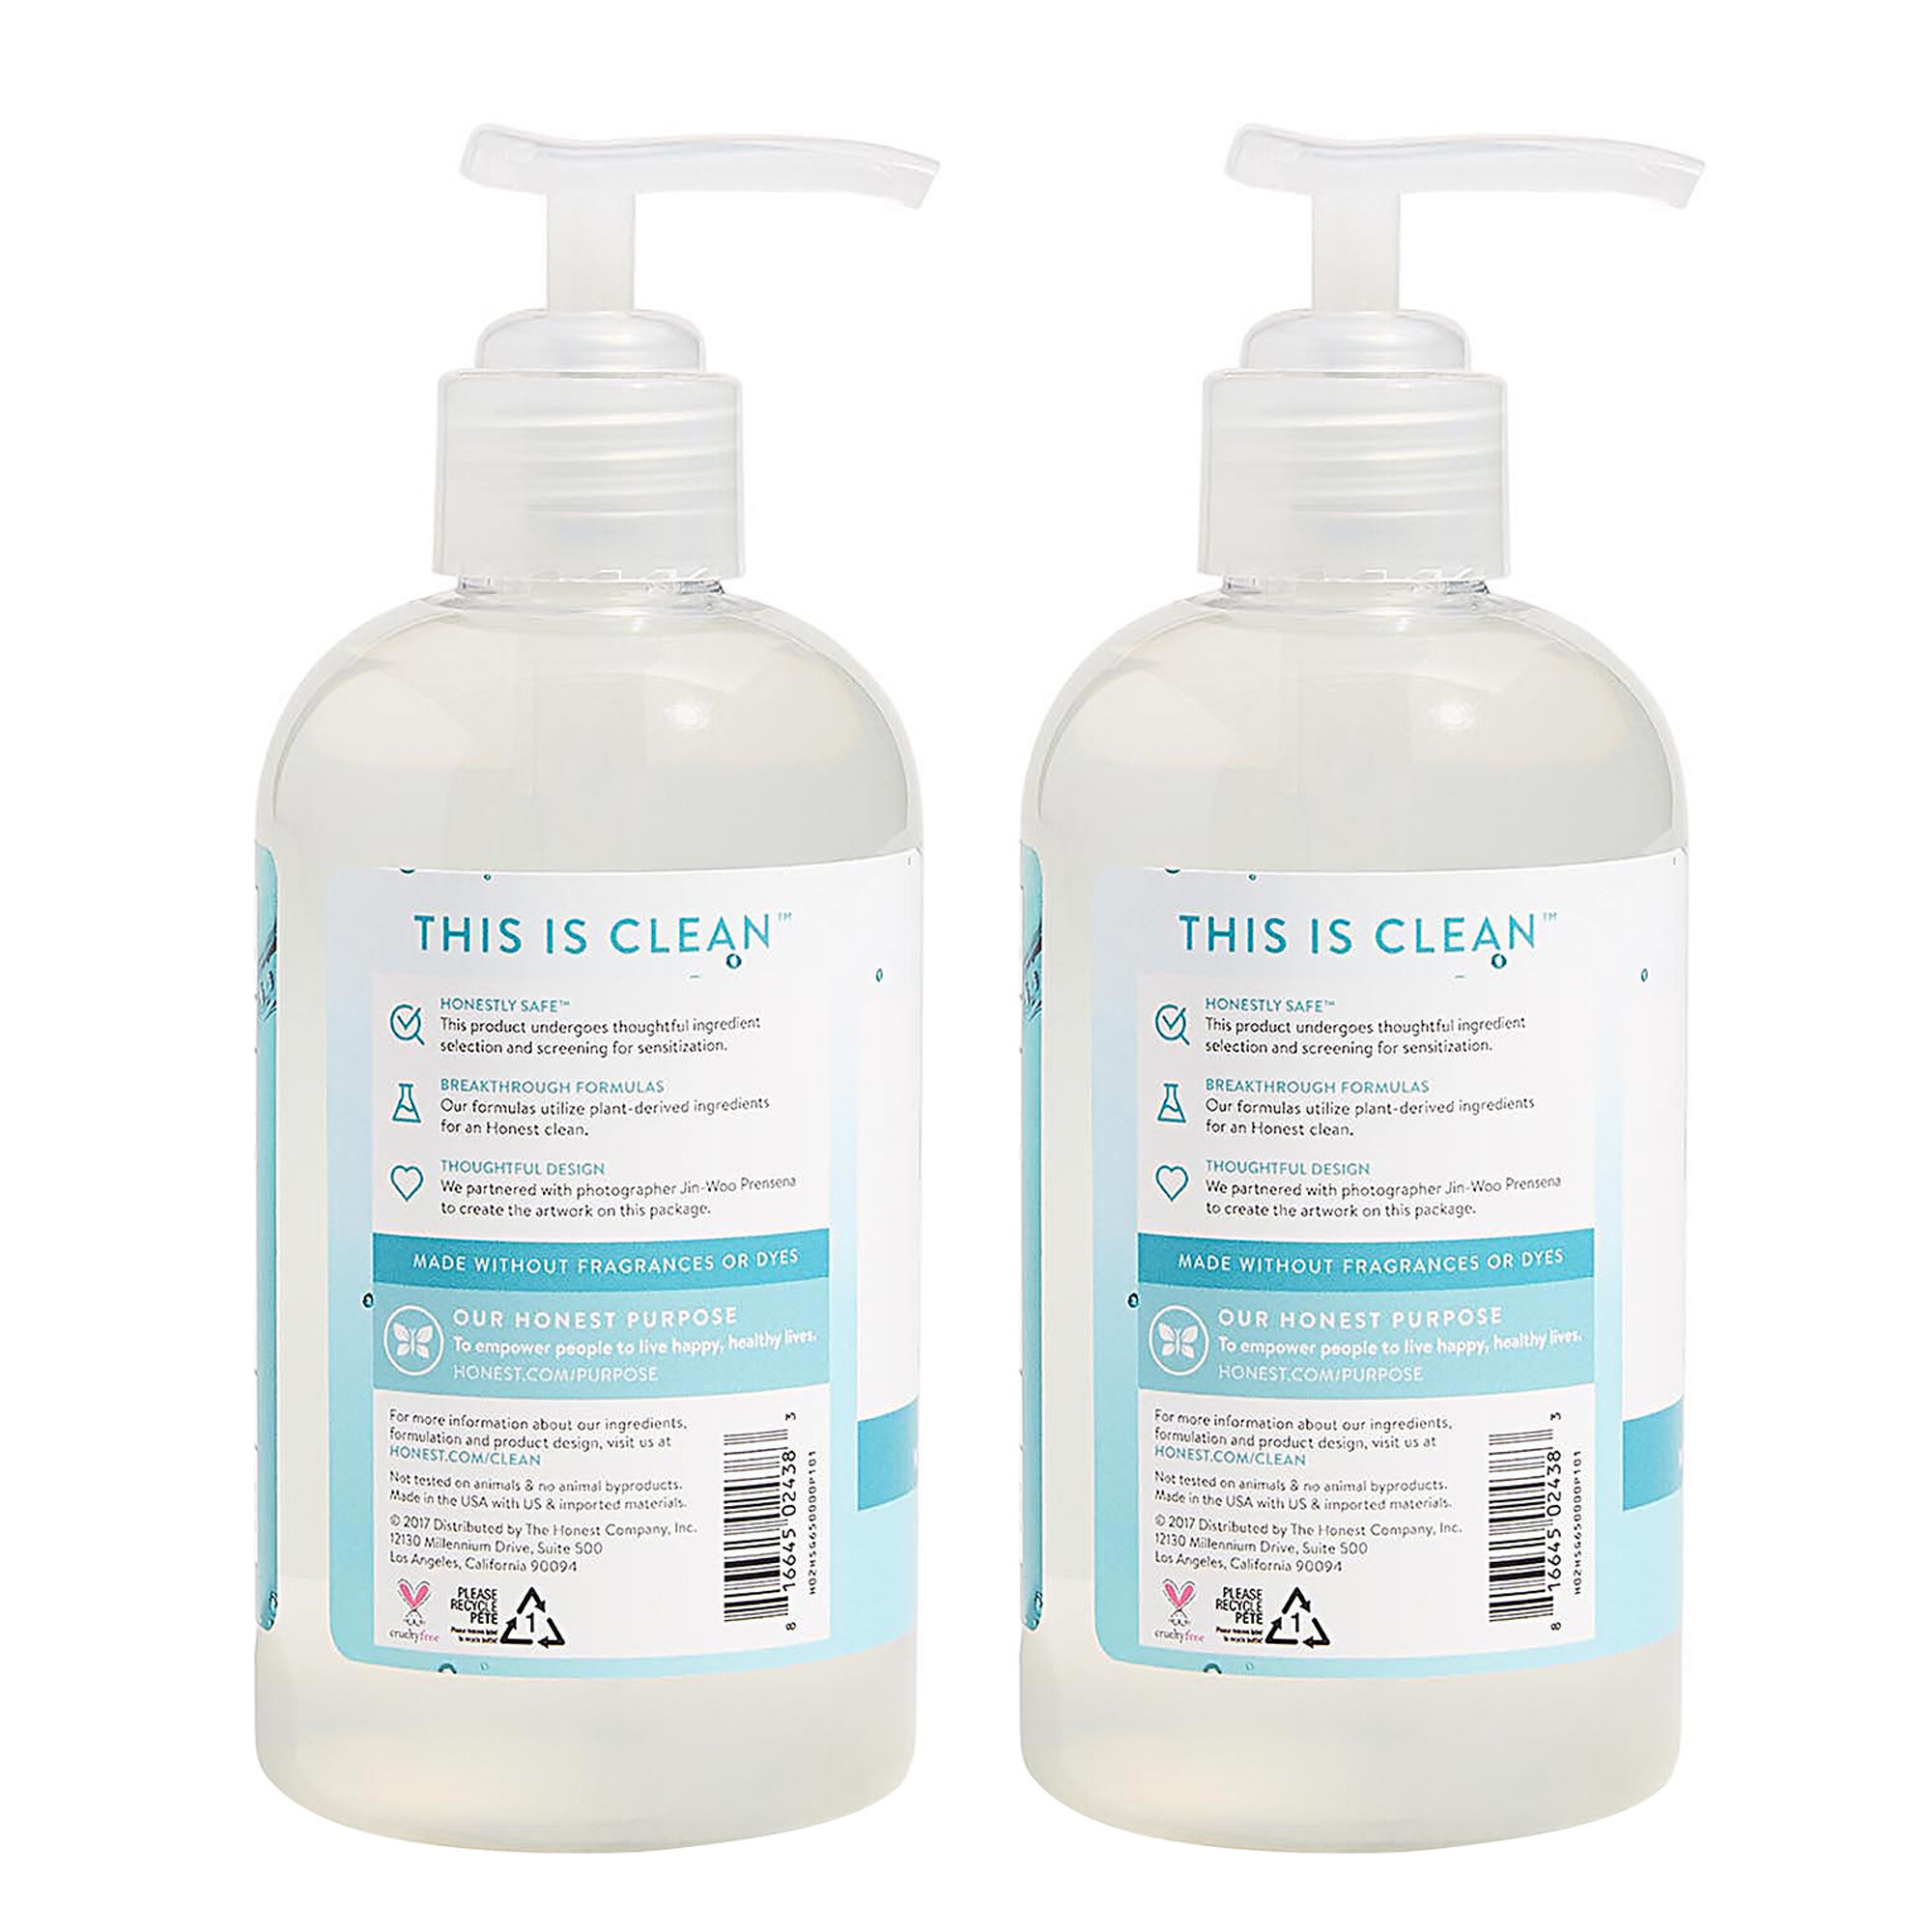 Hand Sanitizer Gel, Free + Clear, 2-Pack